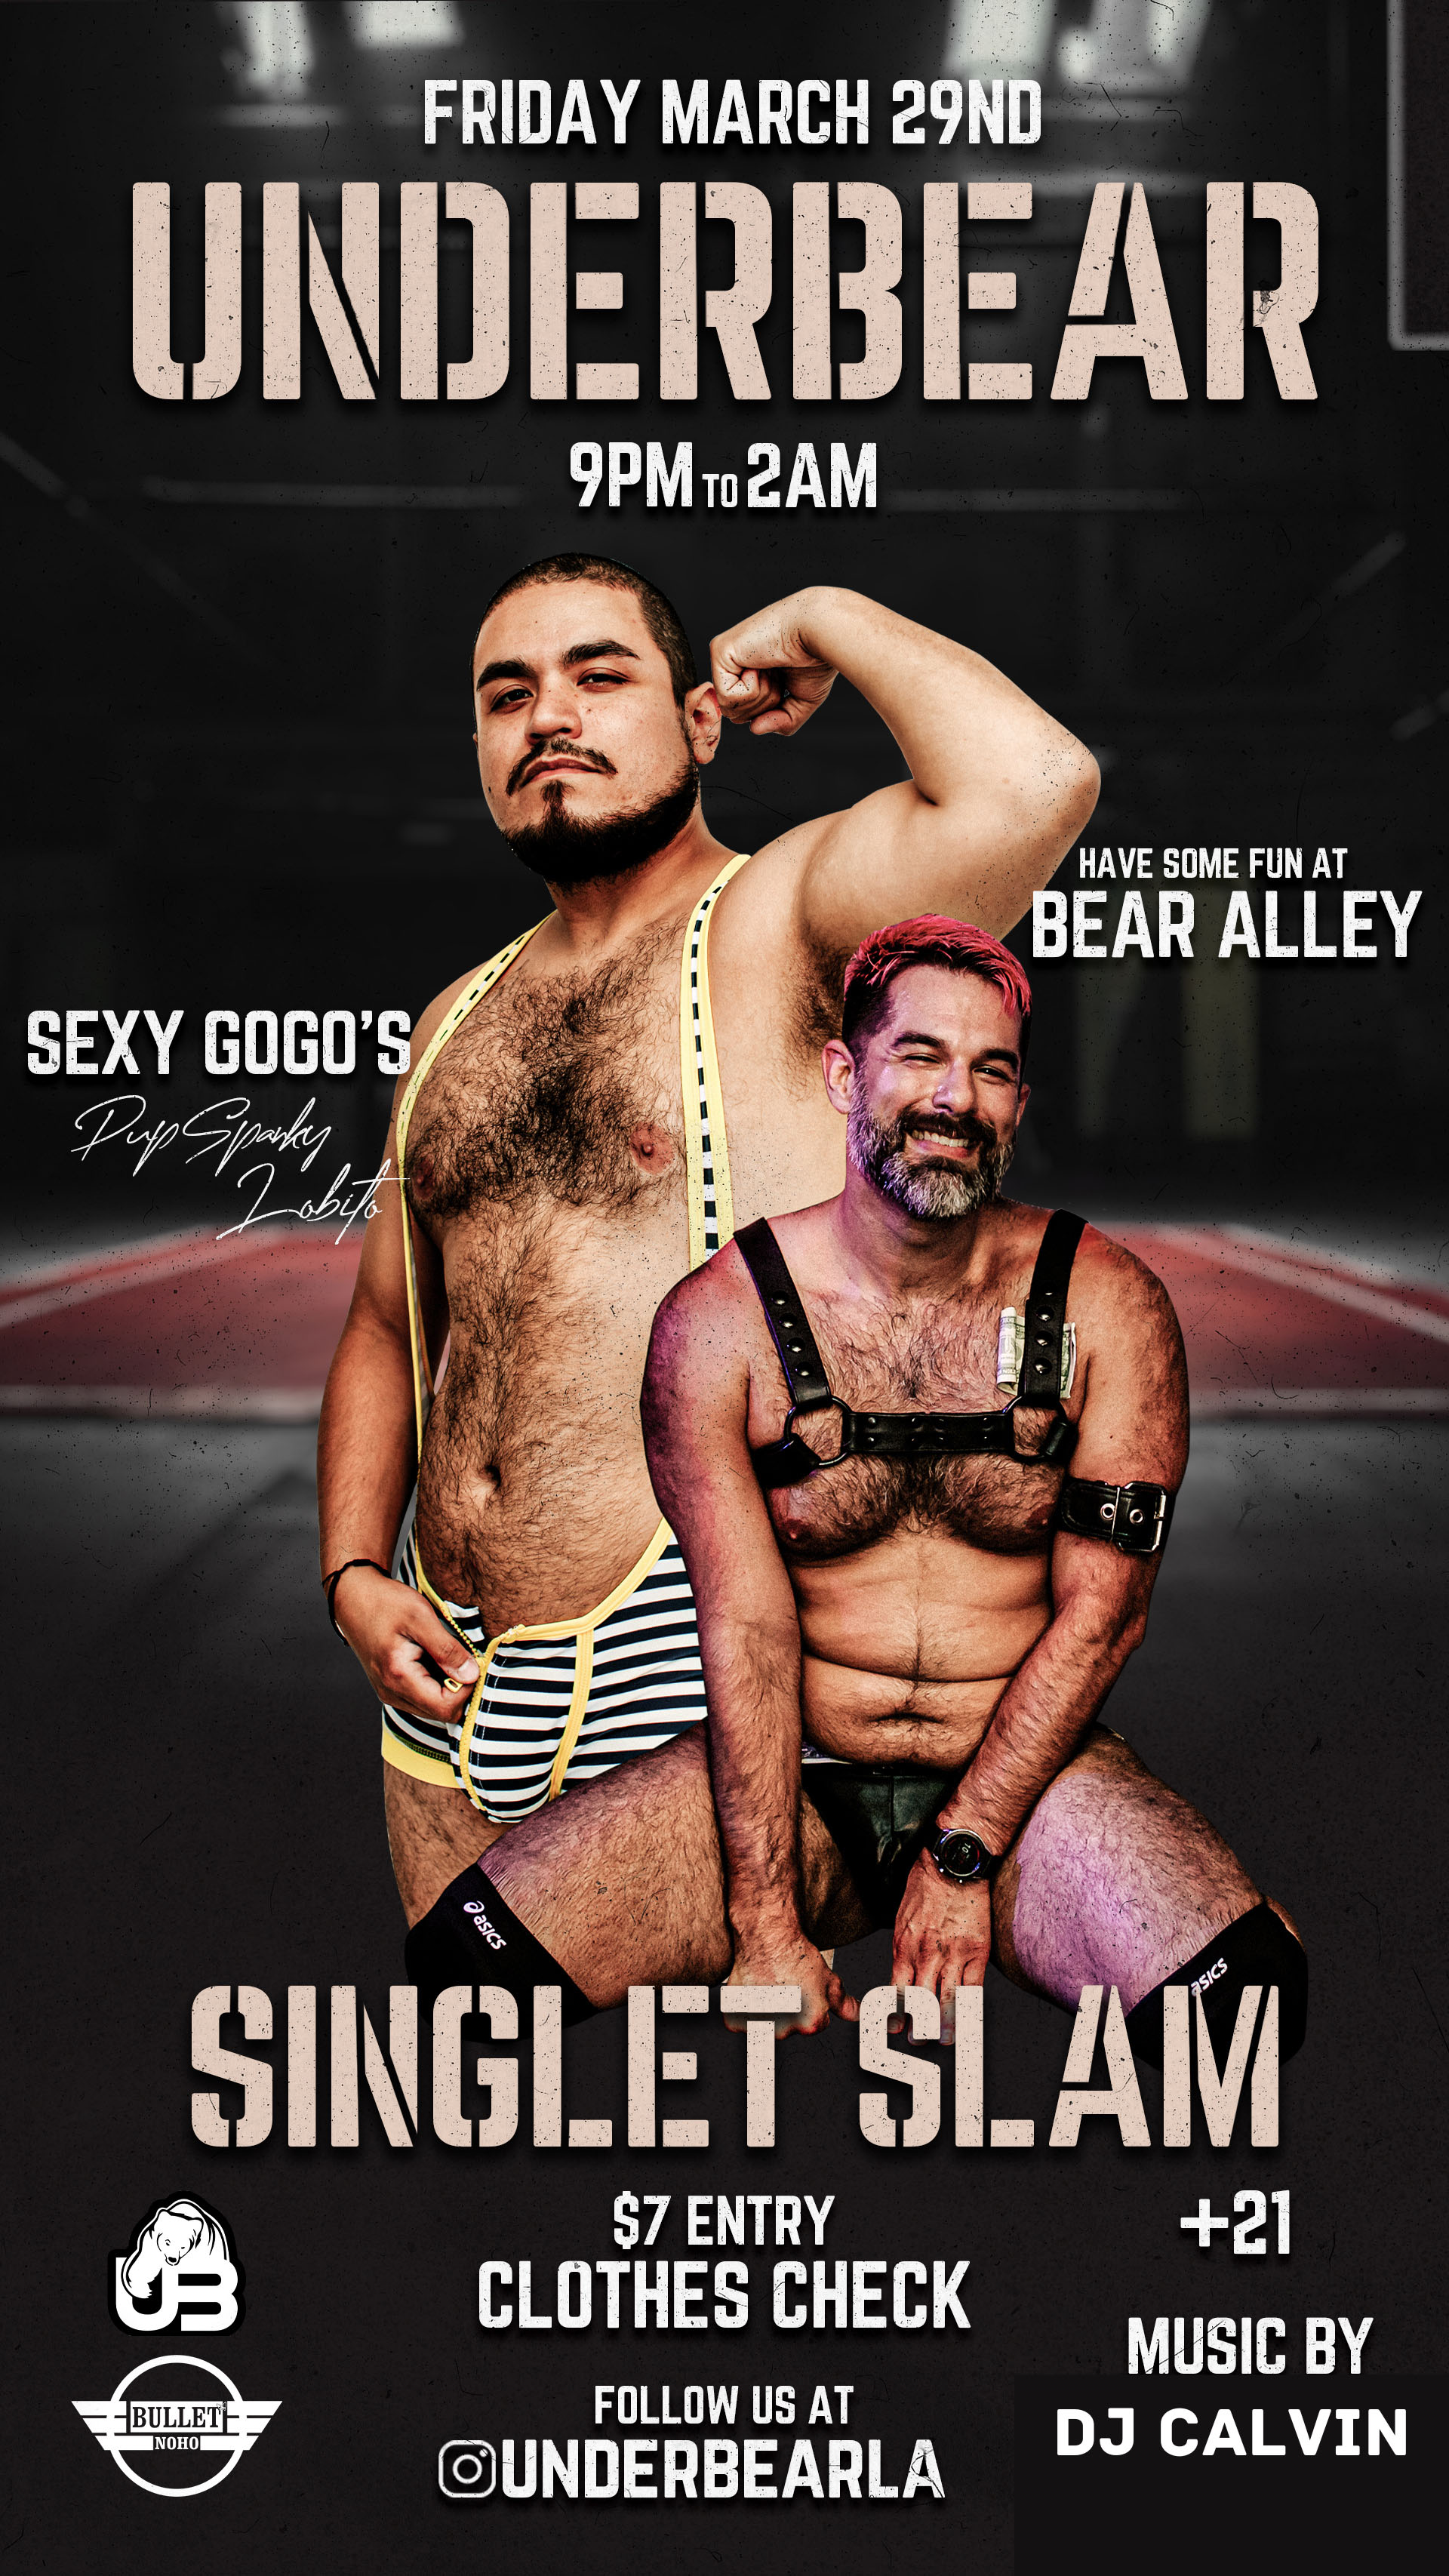 The Bullet Bar and UnderBearParty.com Present UNDERBEAR SINGLET SLAM with DJ CALVIN: Friday, 03/29/24 at 9:00 PM! Free Clothes Check! $7 Cover.